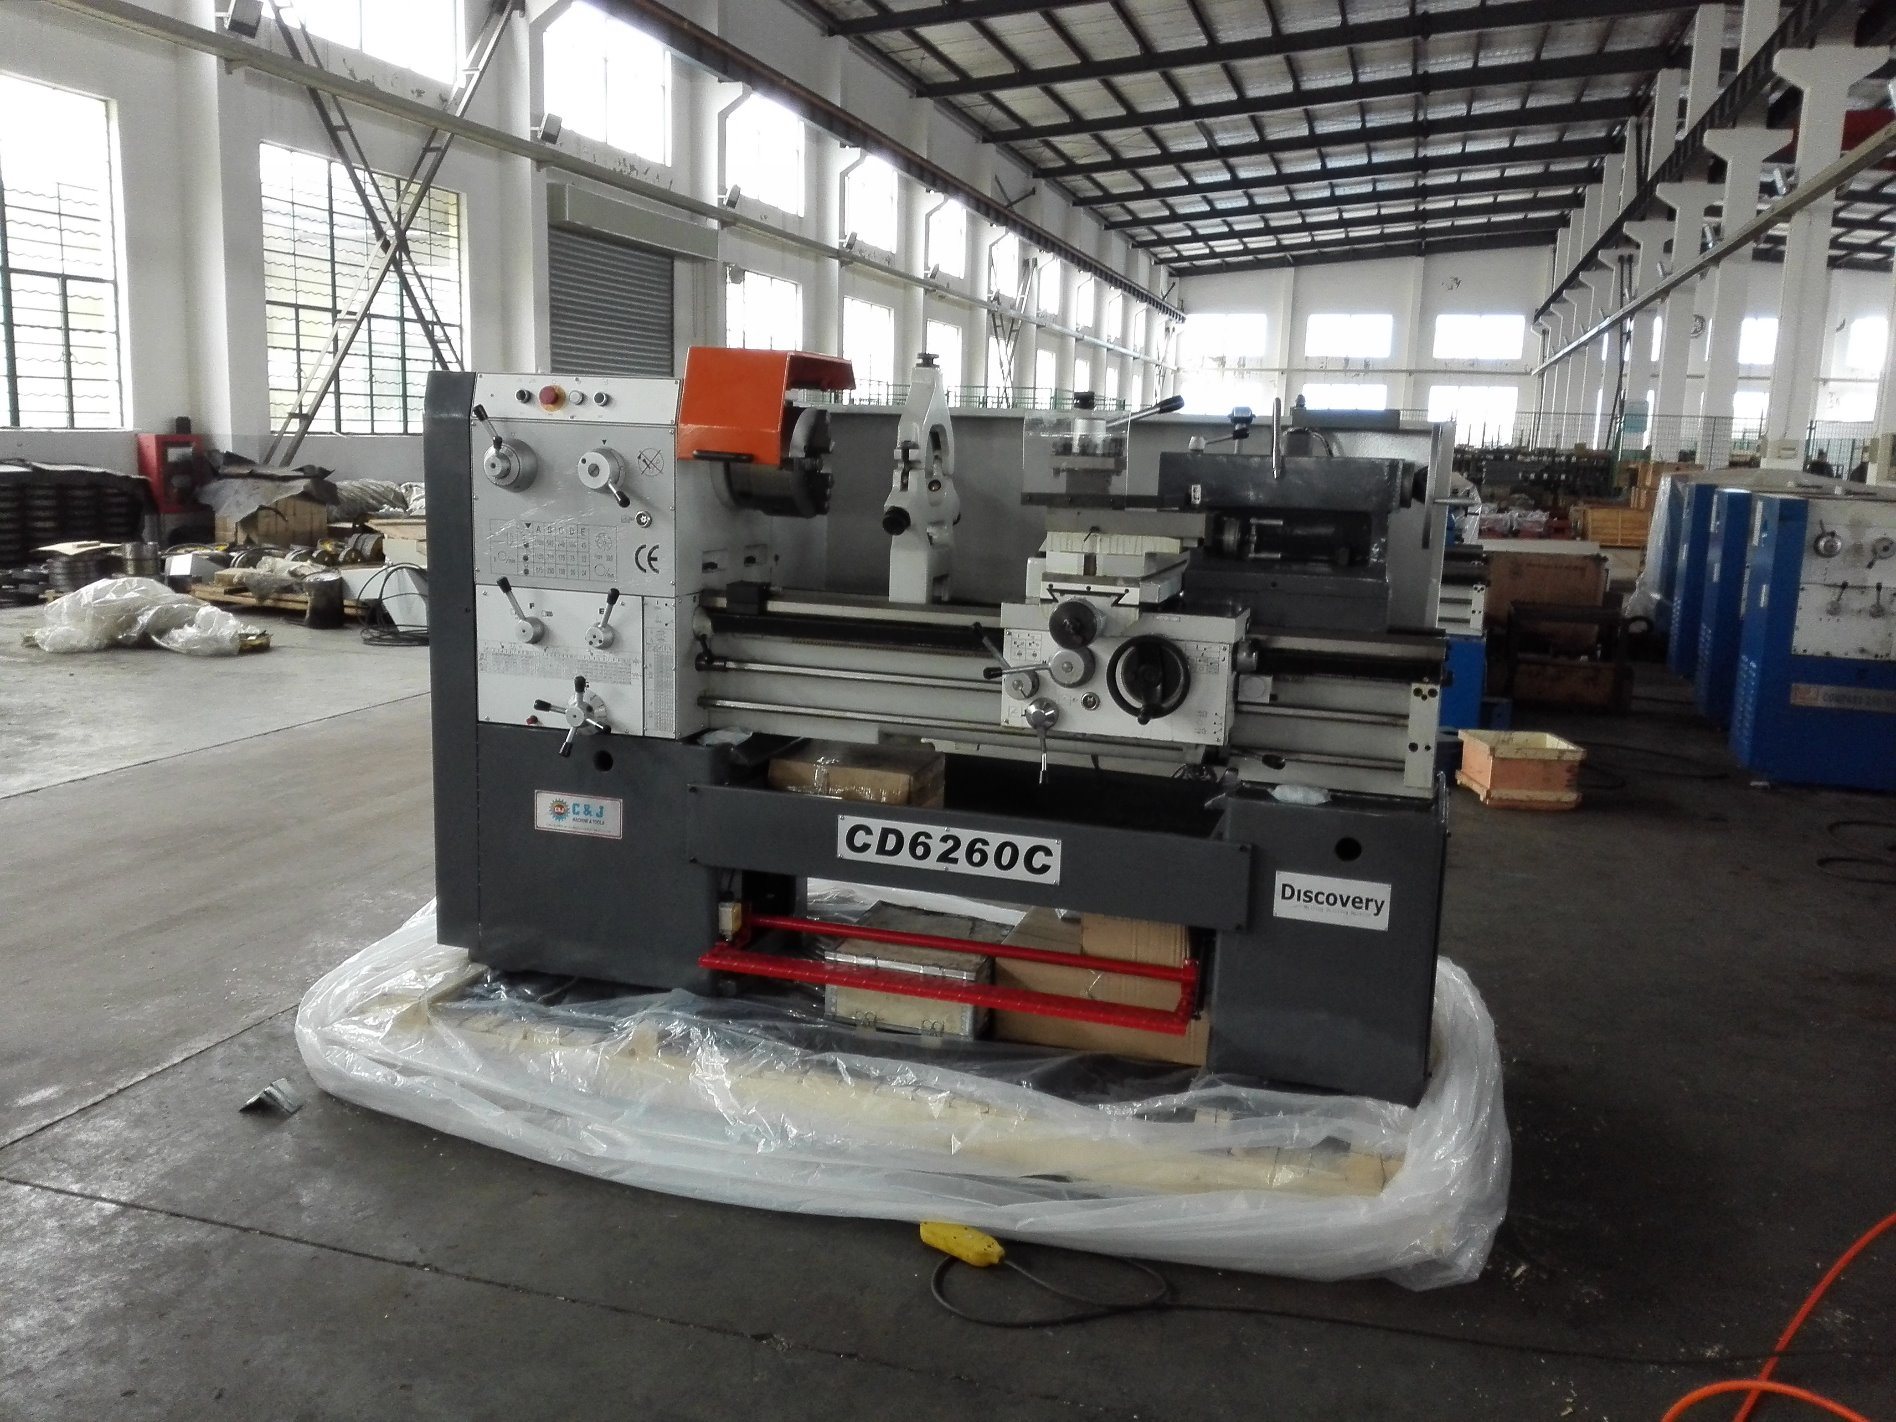 Lathe (CD6260C) Spindle Hole 80mm Center Dis. 1000mm, 1500mm, 2000mm